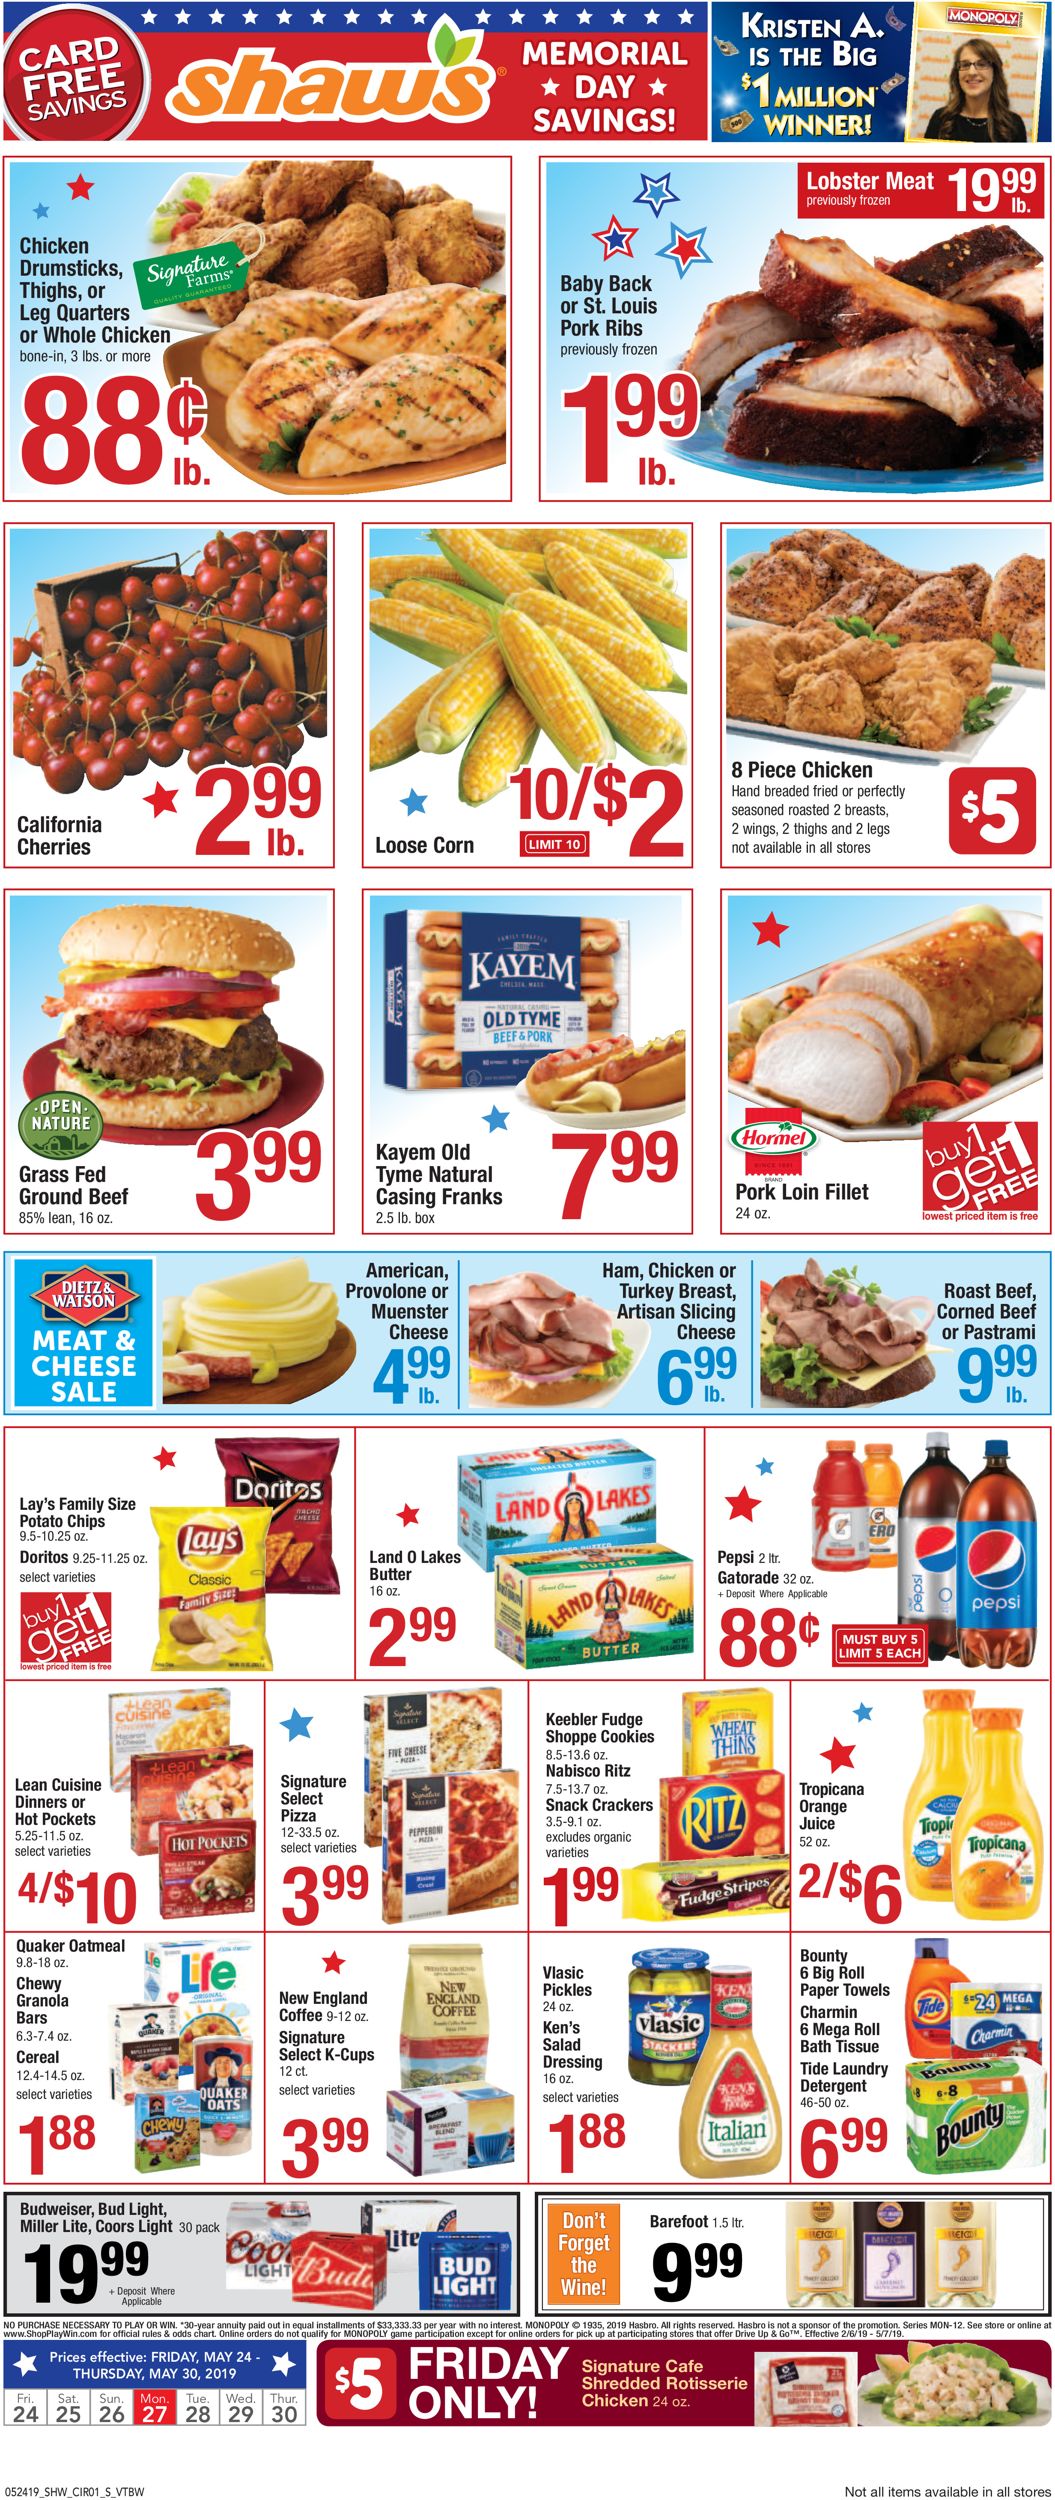 Shaw’s Current weekly ad 05/24 - 05/30/2019 [3] - frequent-ads.com